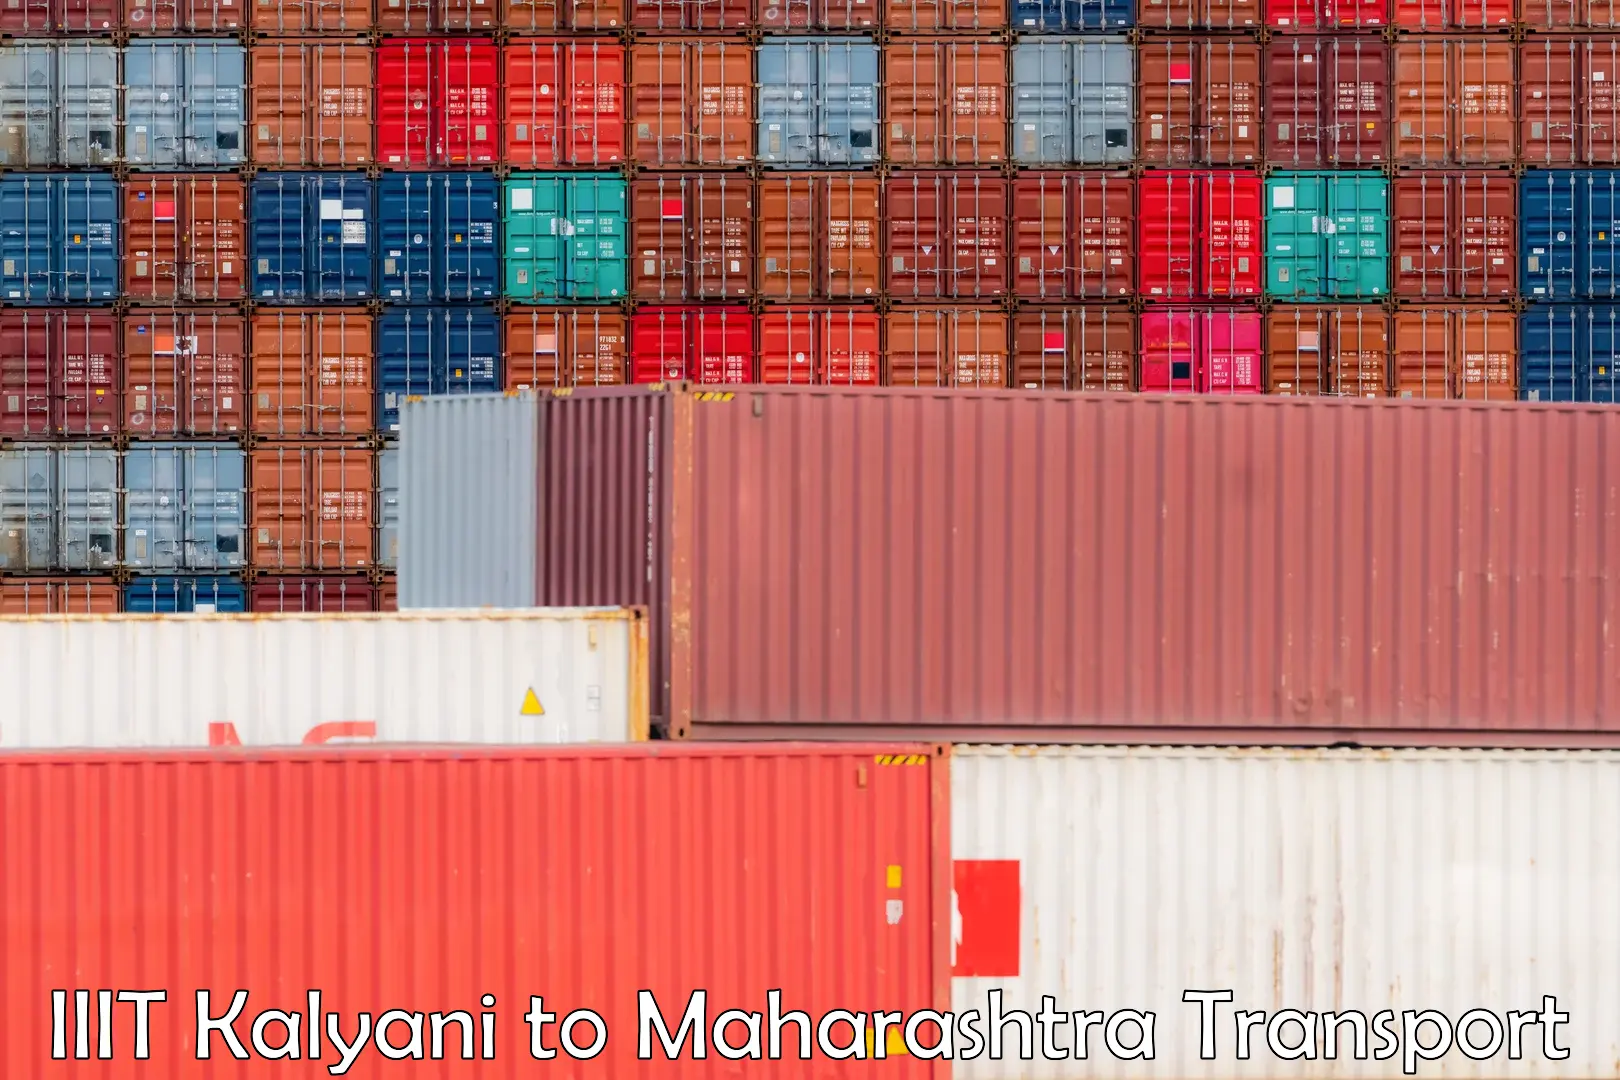 Container transportation services IIIT Kalyani to DY Patil Vidyapeeth Pune